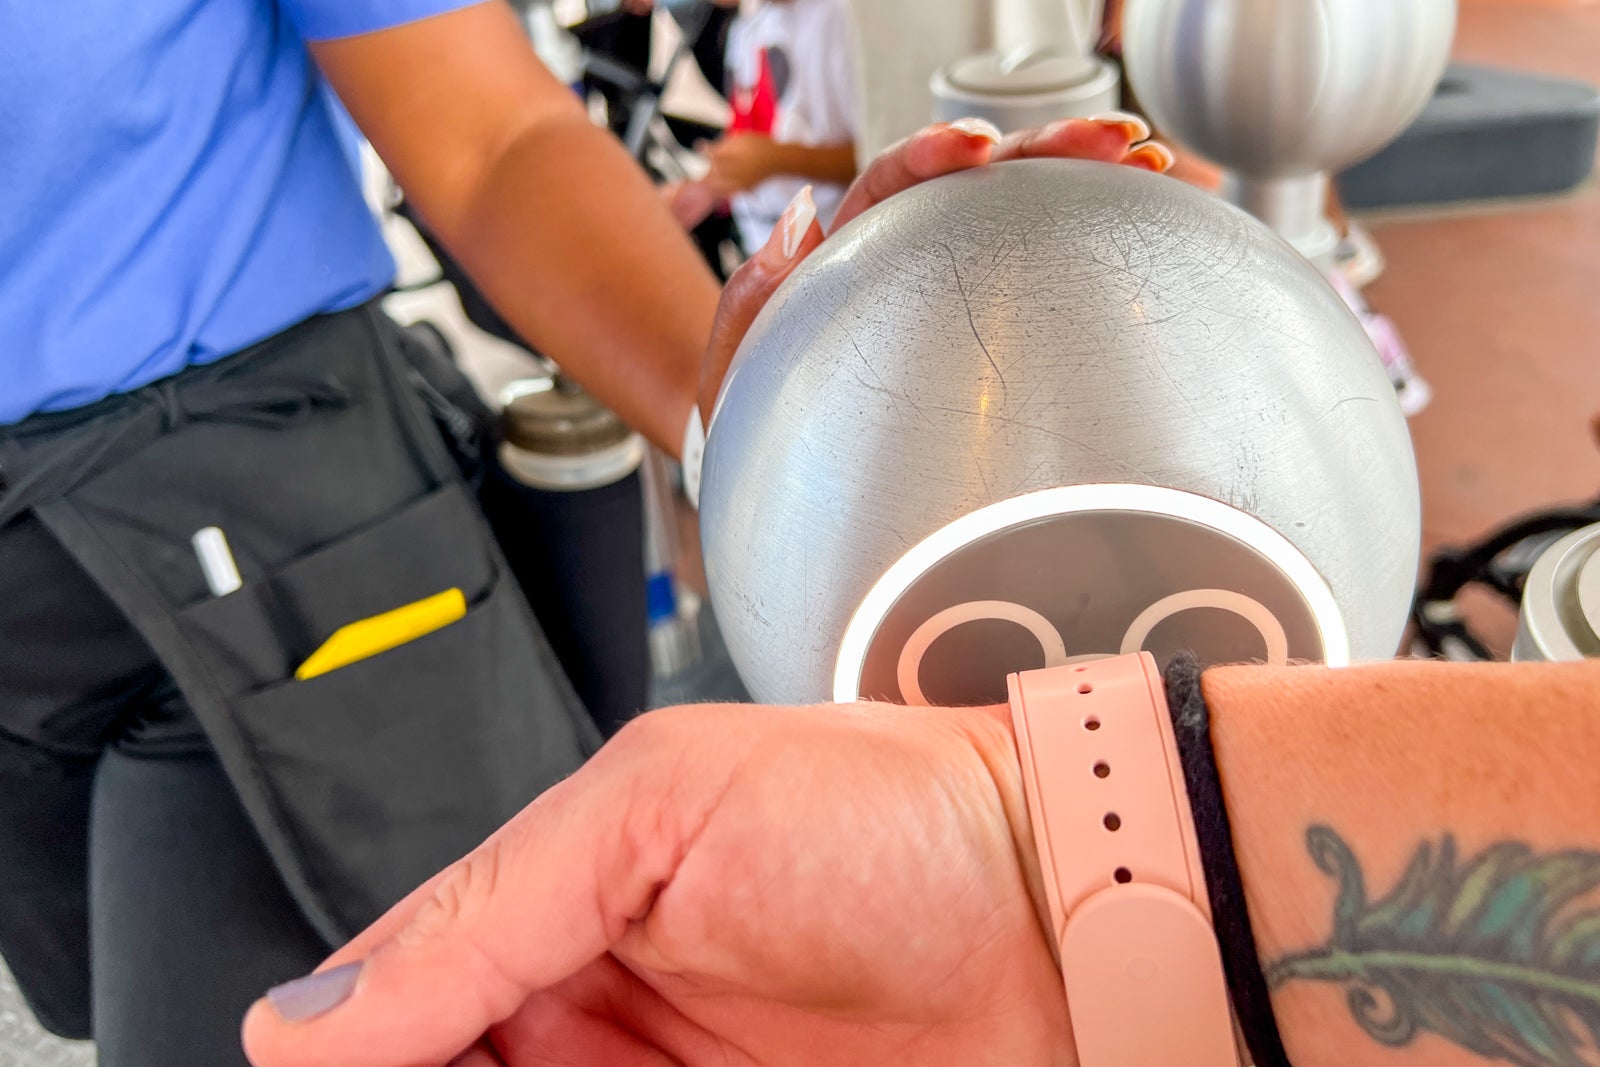 A person using a MagicBand to tap into a Disney park